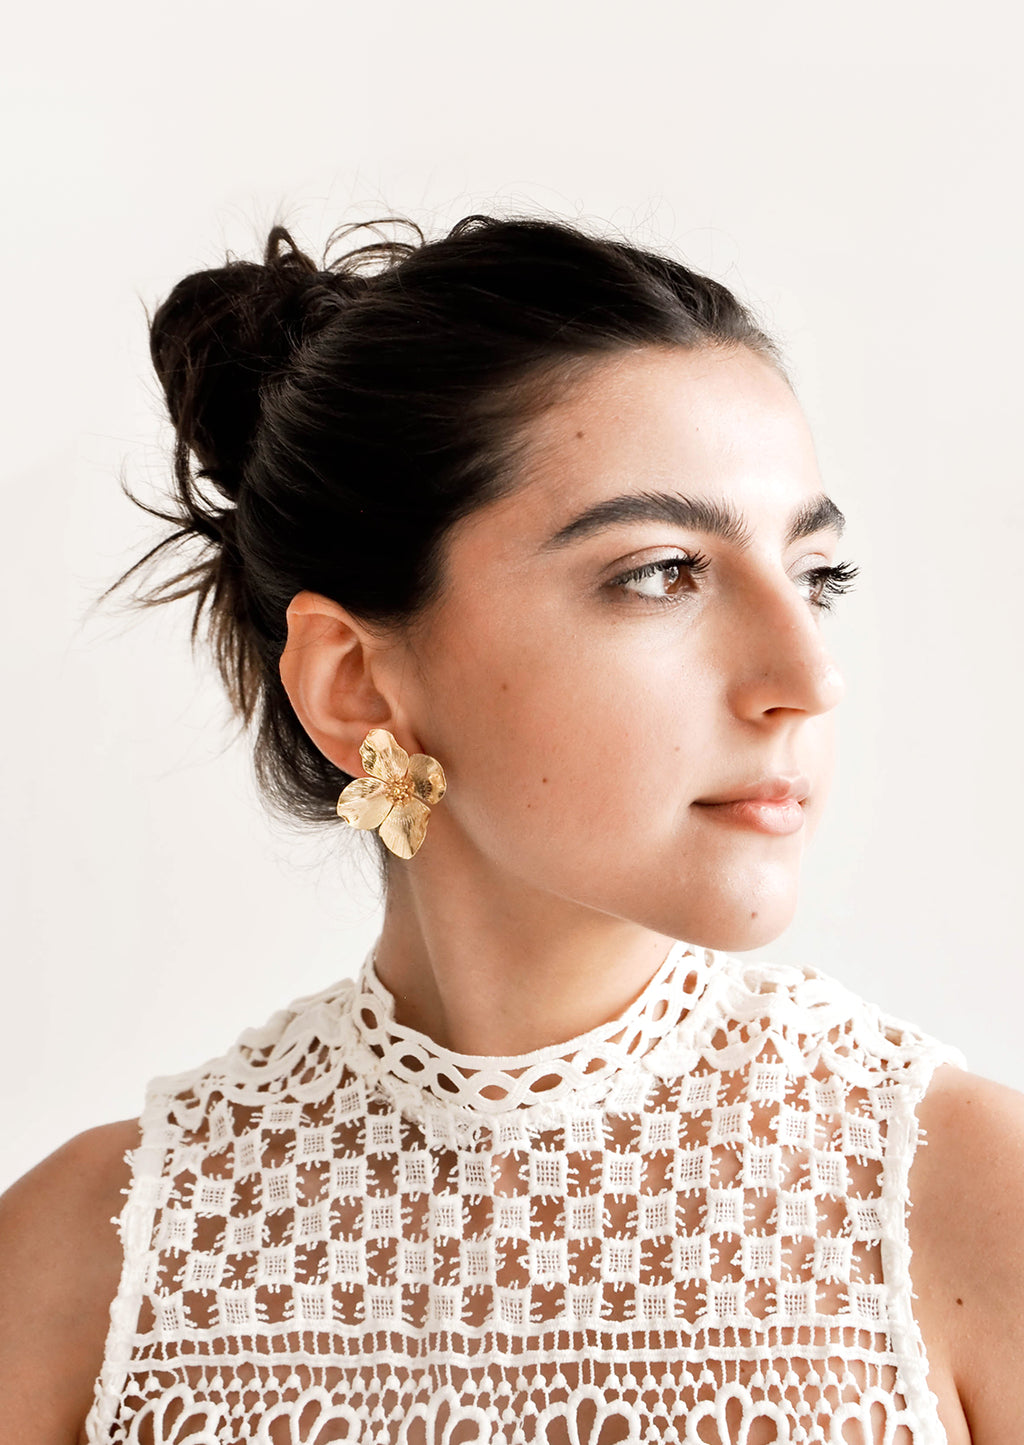 2: Model wears gold flower-shaped earrings and white top.